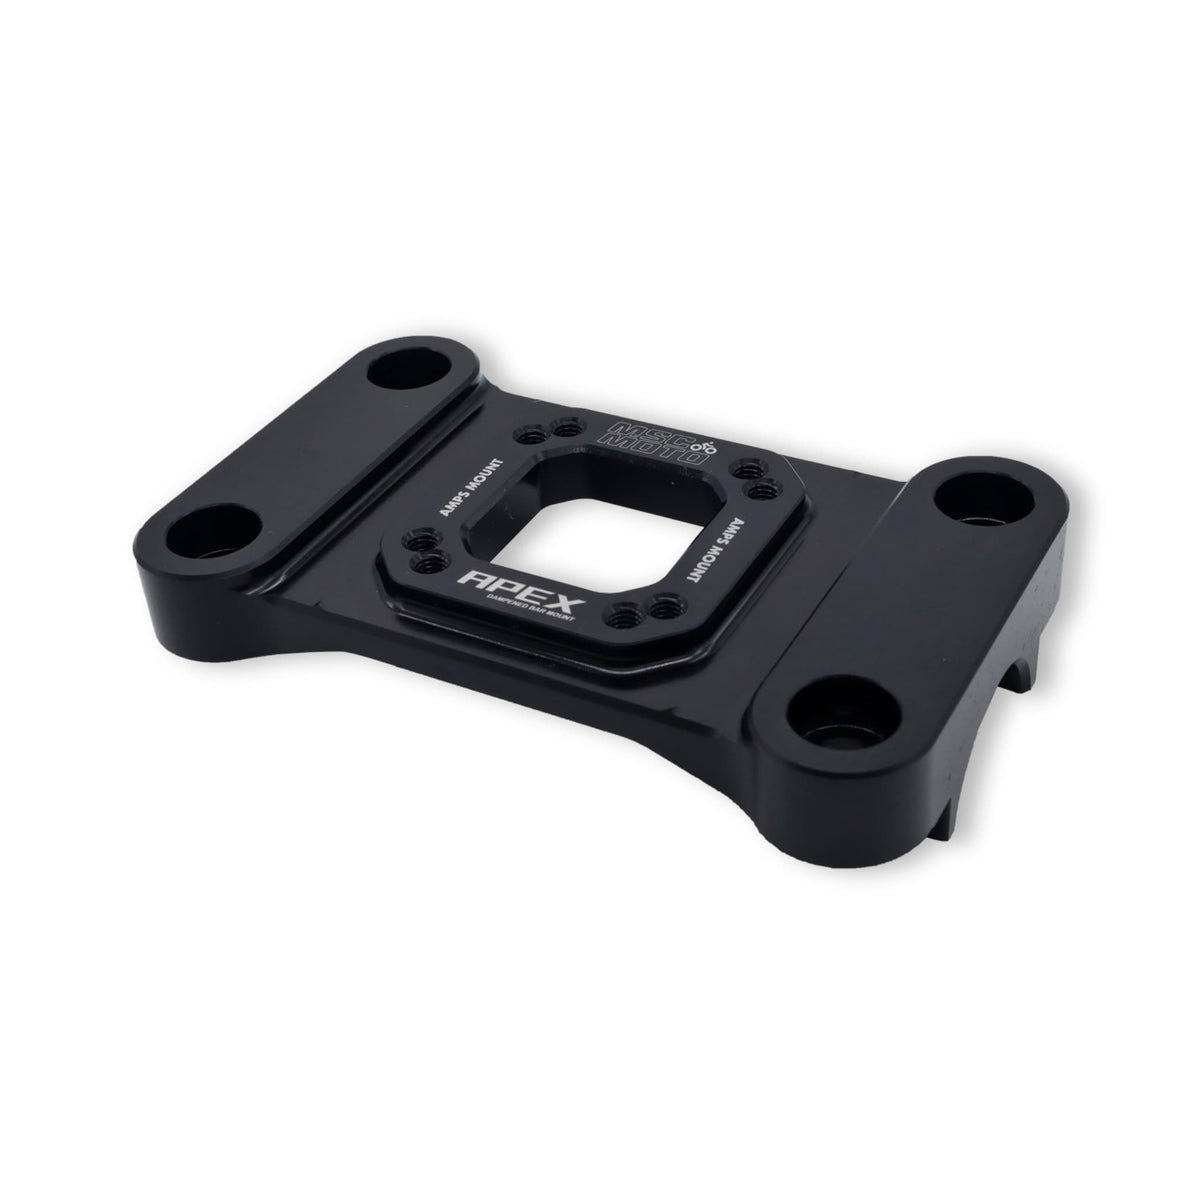 96mm APEX to AMPS GPS Bar Mount Upgrade Clamp - Upgrade Kit for AXIS Down Under AX0003 and AX0025